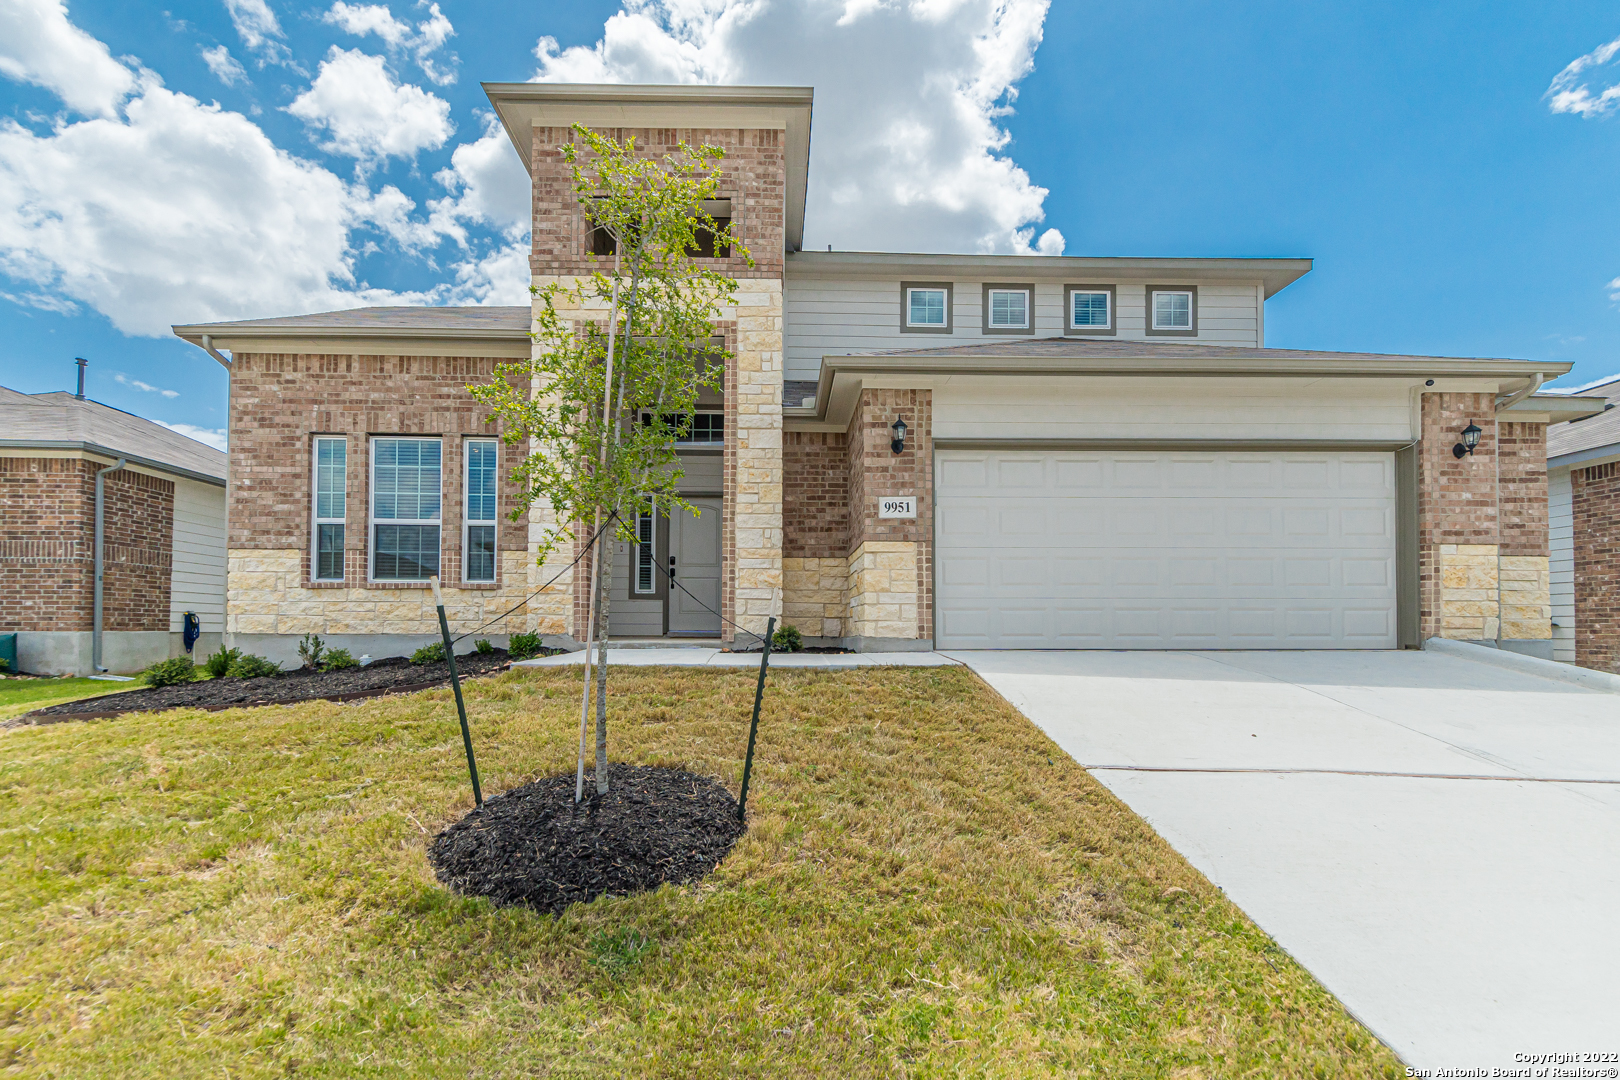 Like New! move in ready. Open floor plan.  Game and media room. Upgraded features are 5' Garage Extension, Covered Patio, Metal Stair Spindles, Natural Stone Limestone to front exterior. Luxury Vinyl Plank flooring. Complete with an irrigation system, water softener.